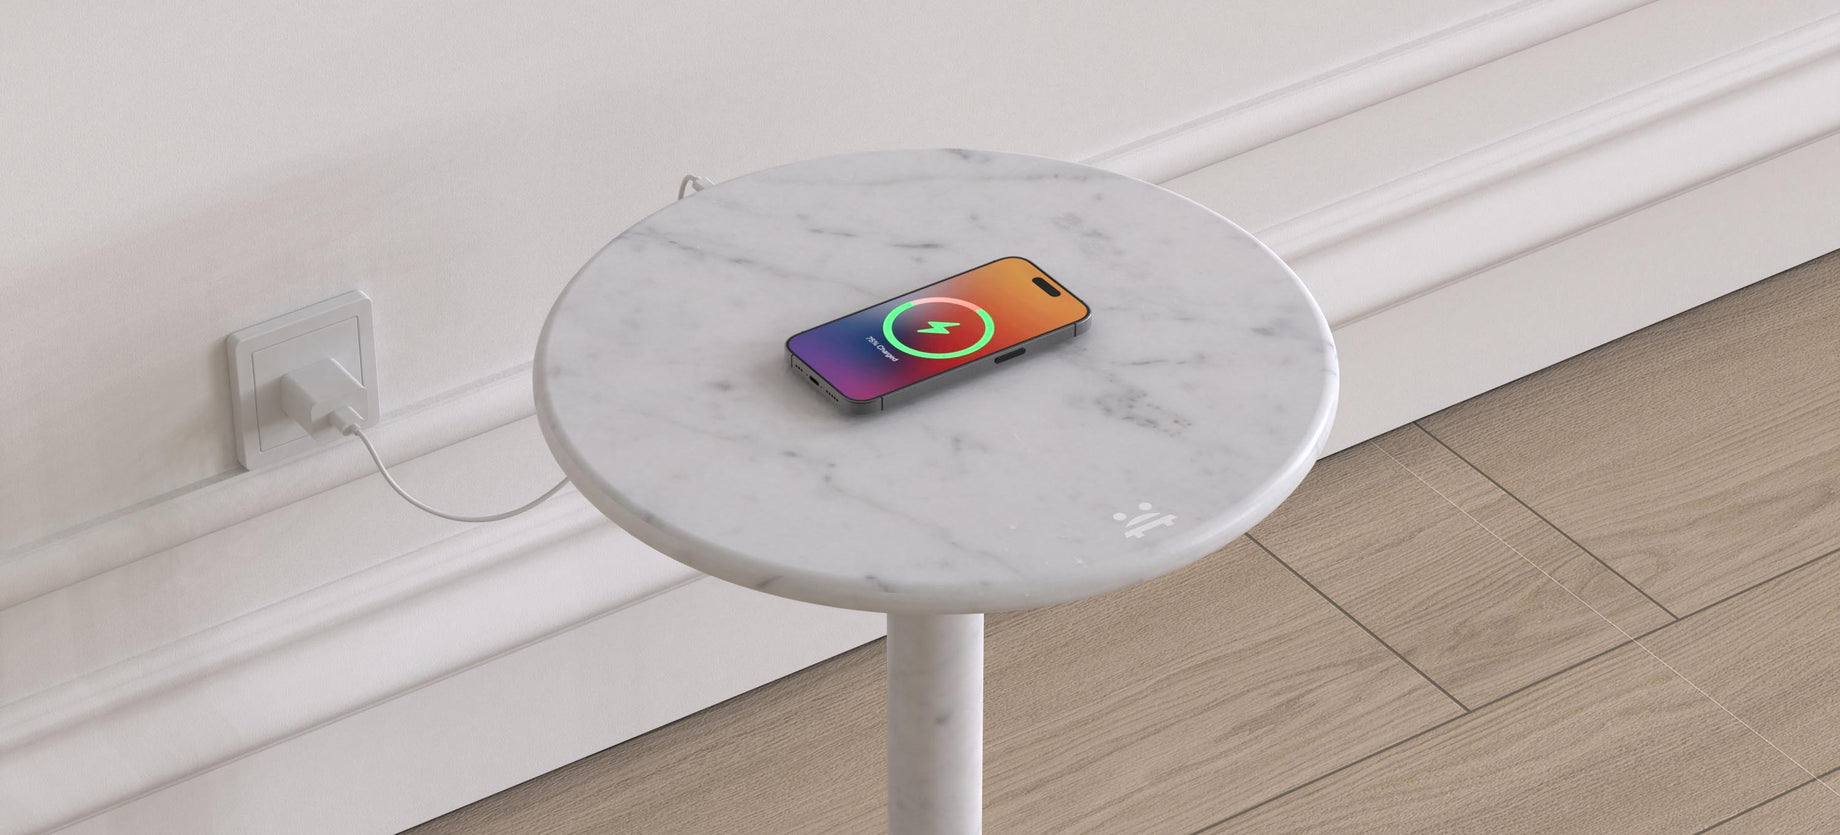 OIXDESIGN blogs post, Wireless Charging blog, Cover photo